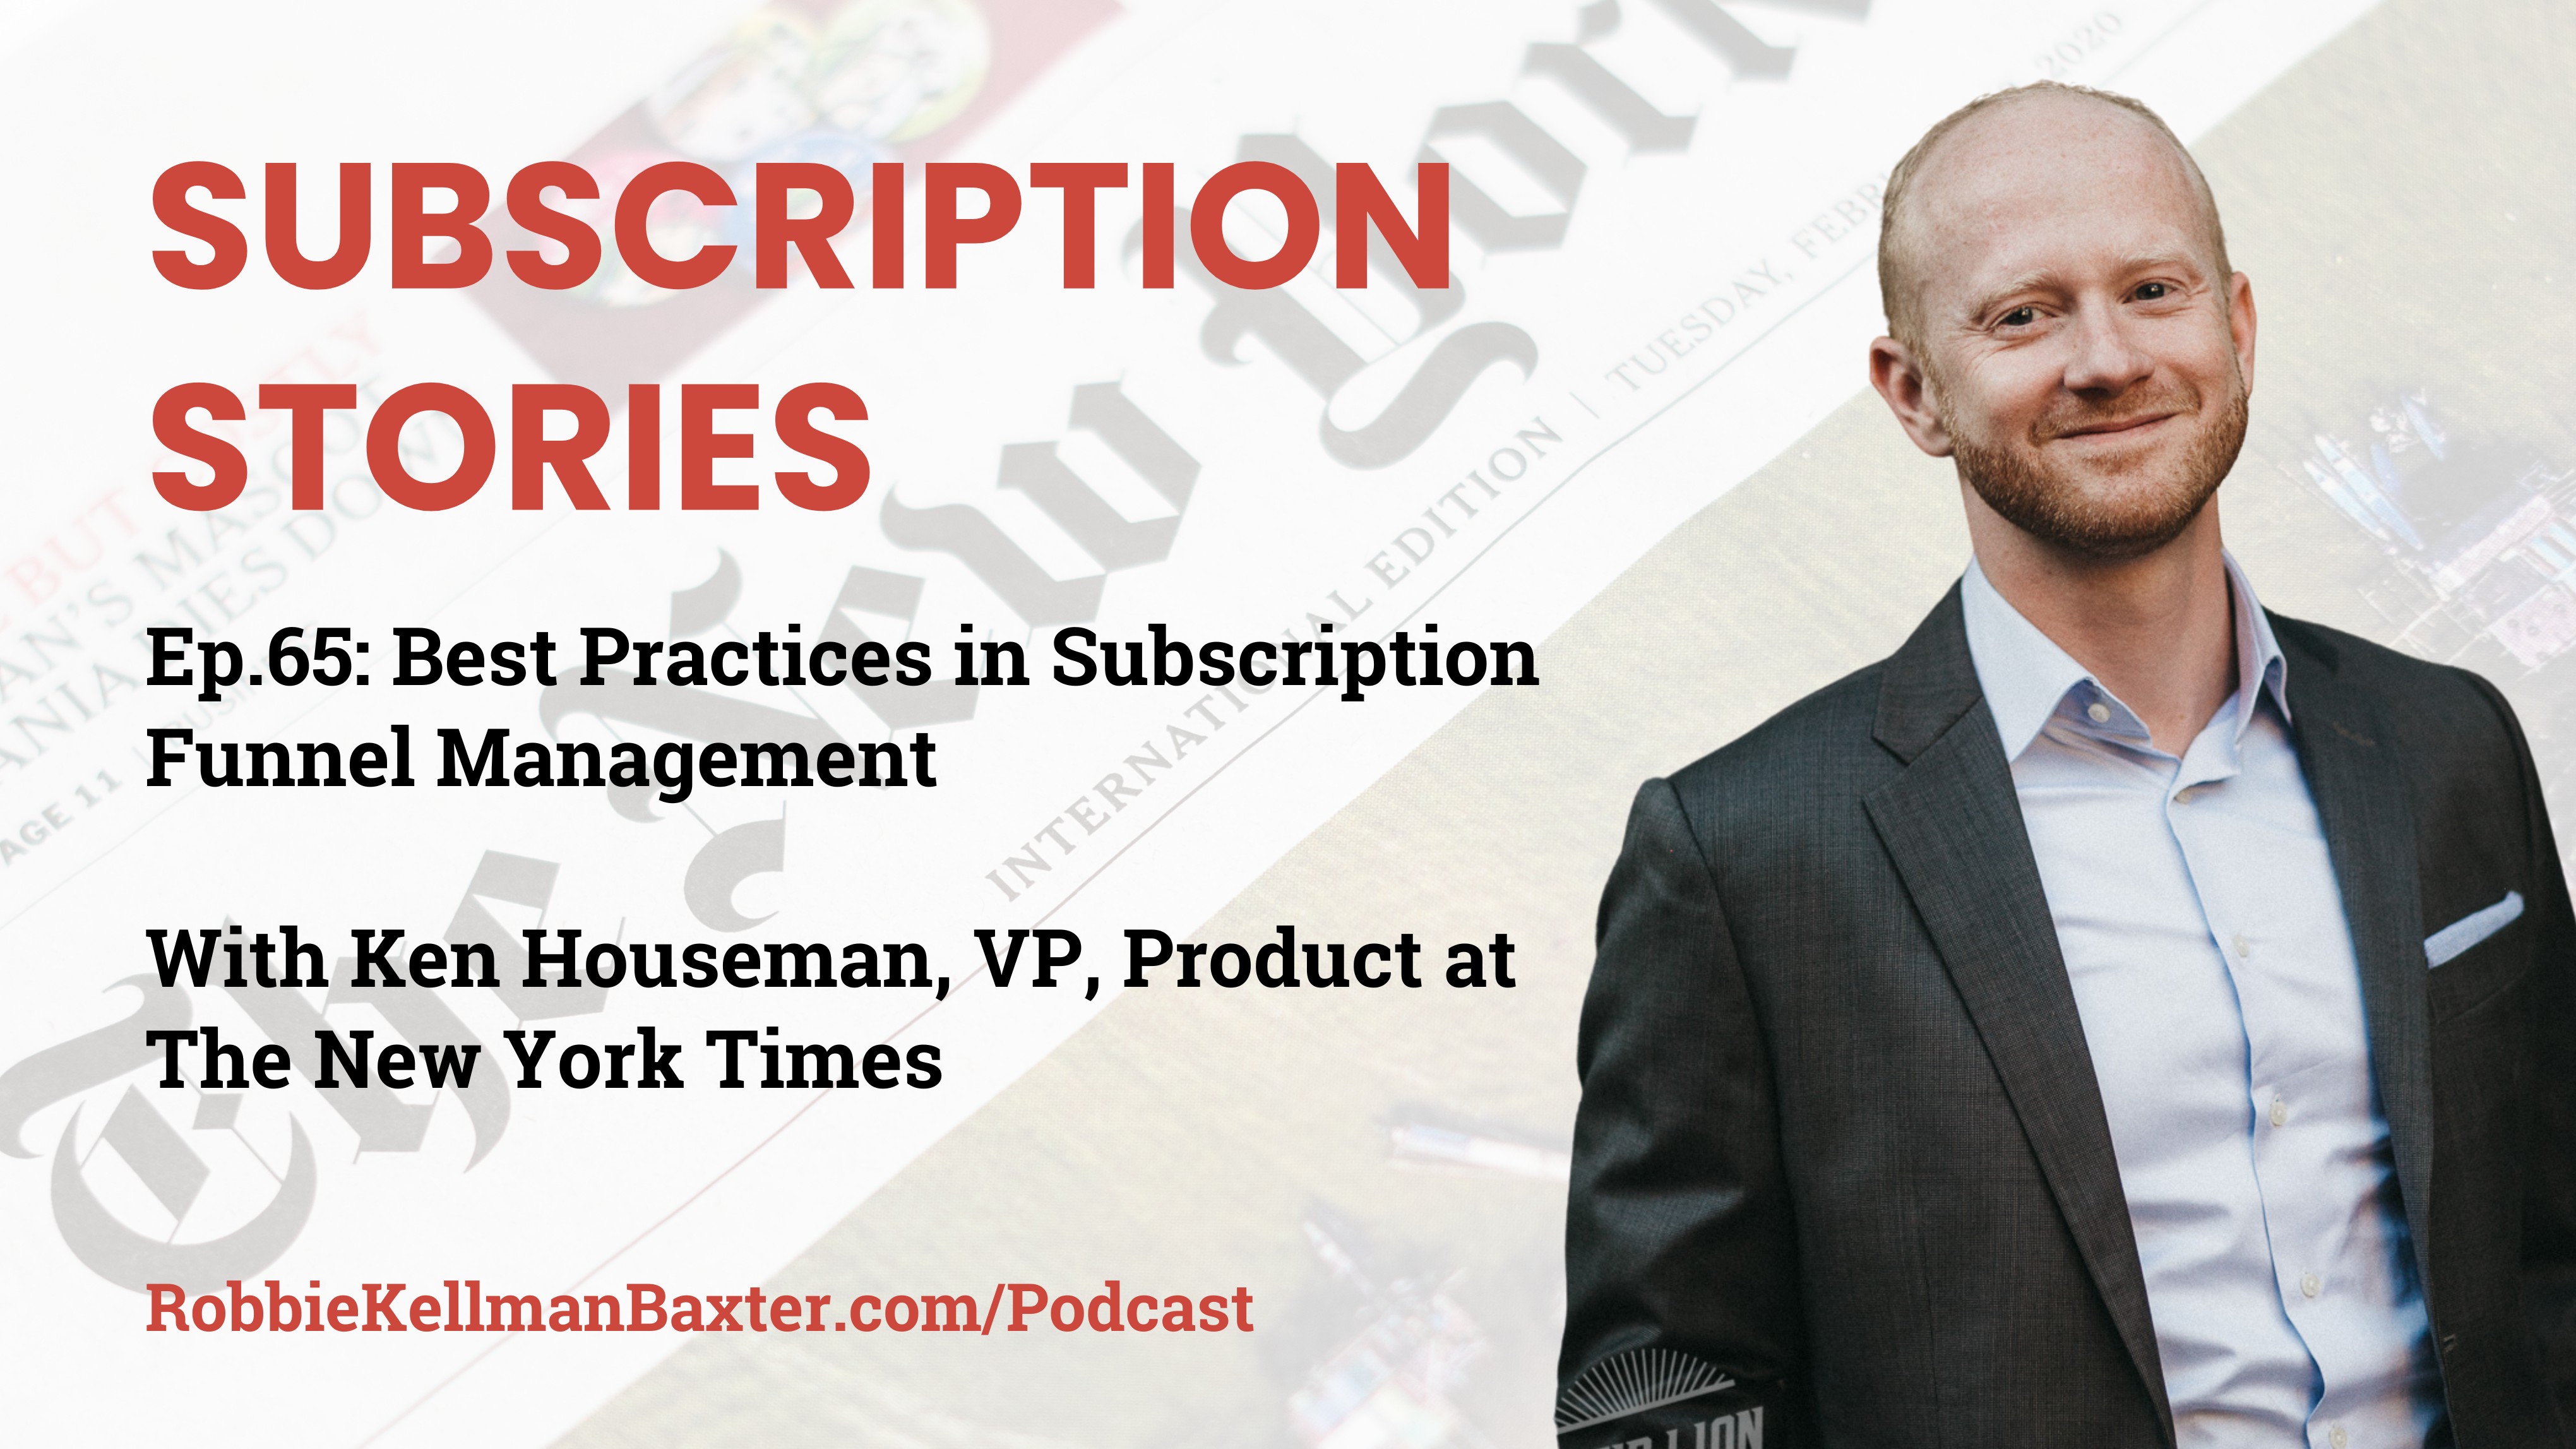 Best Practices in Subscription Funnel Management with Ken Houseman, VP, Product at The New York Times